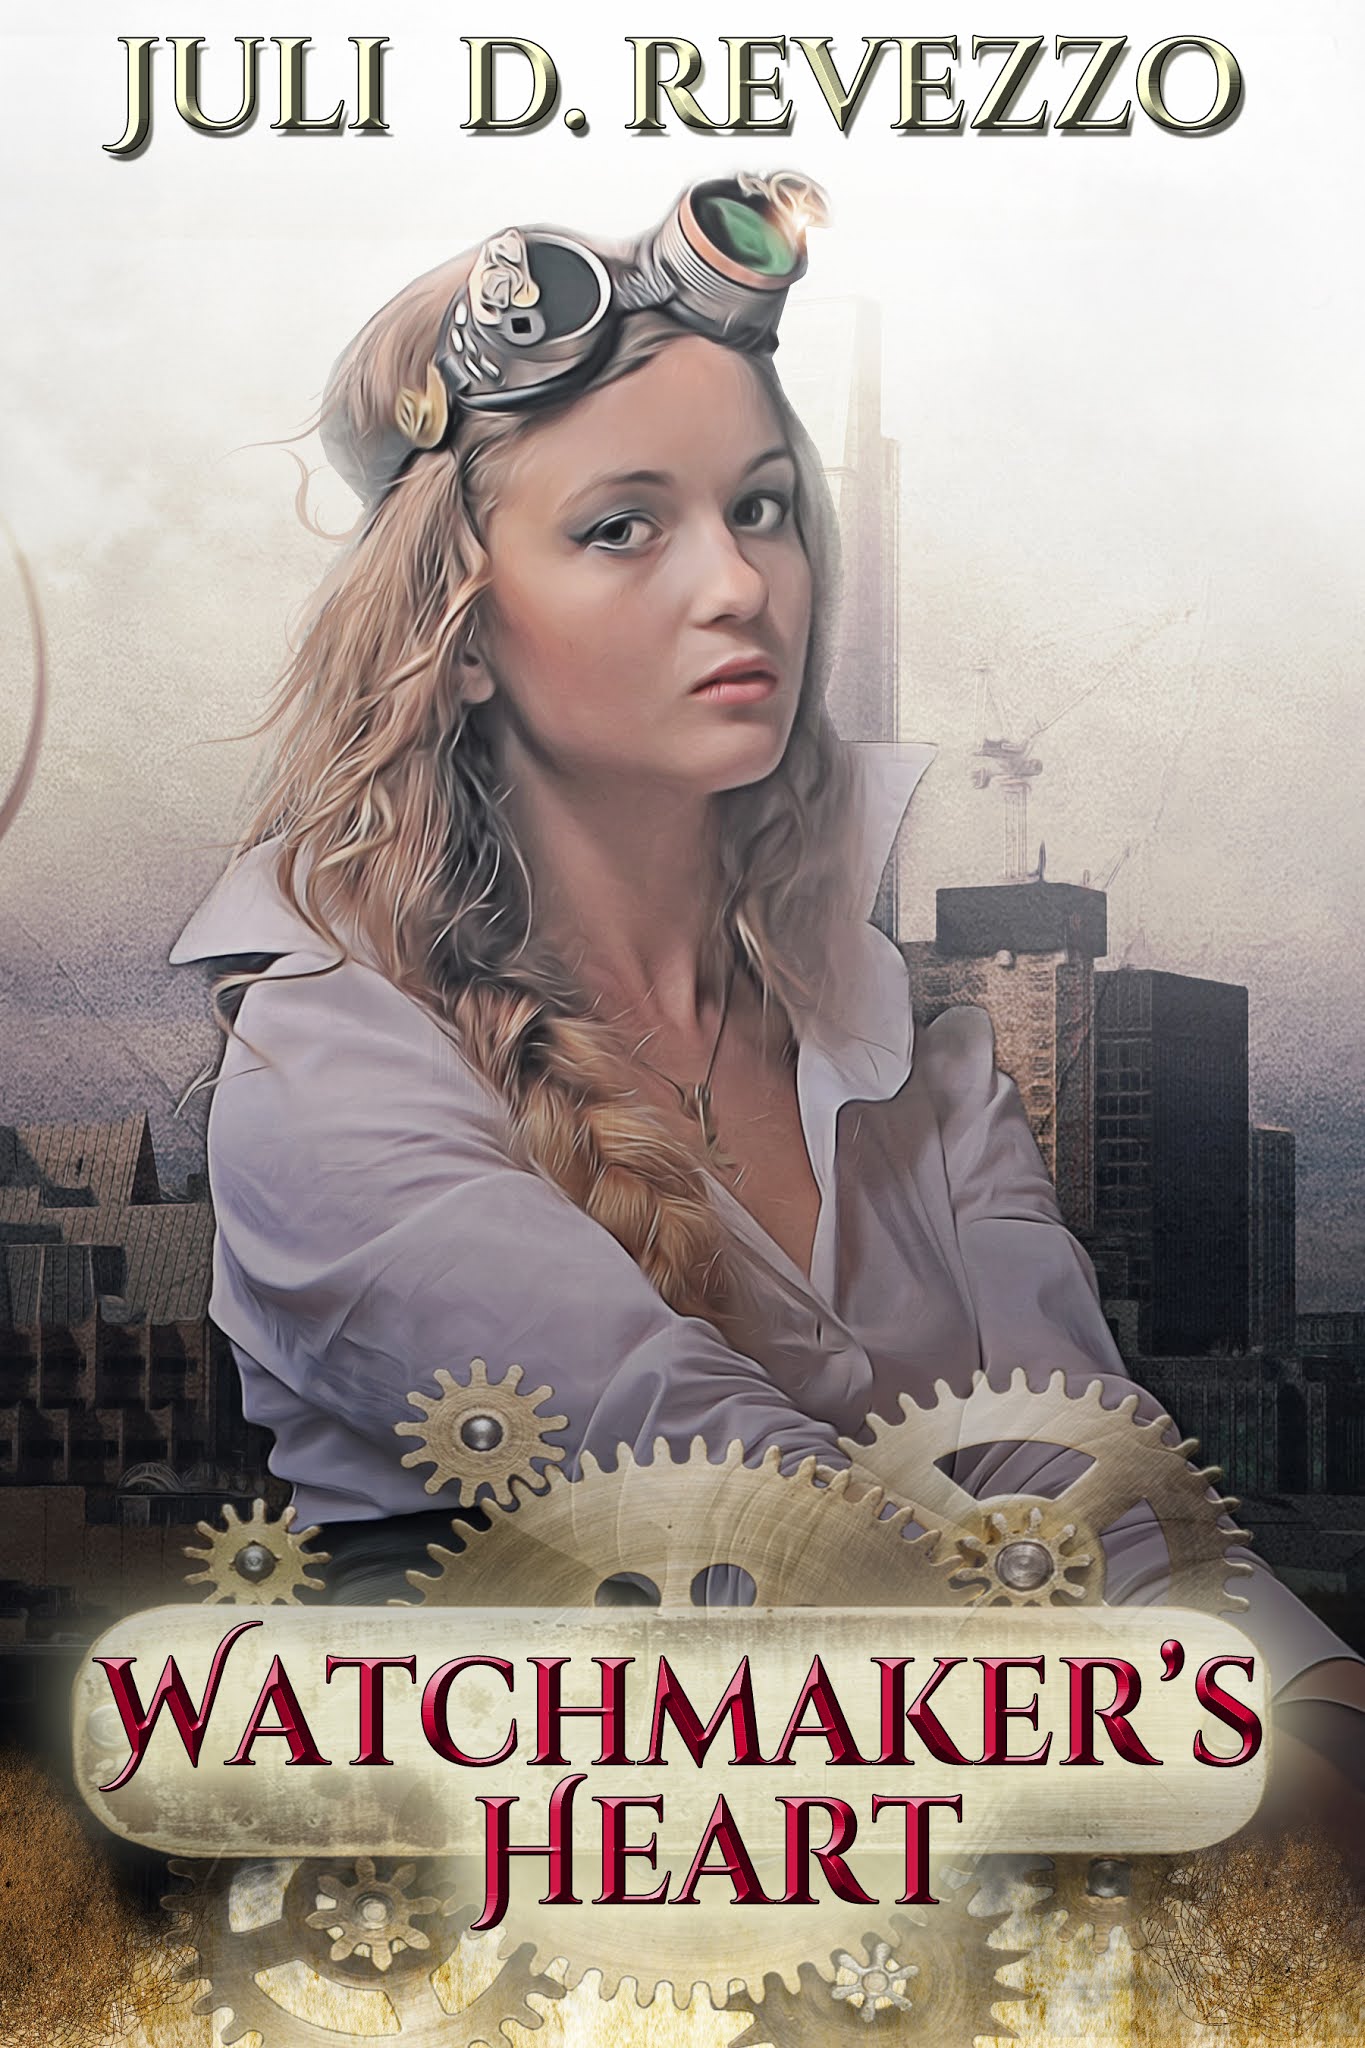 Watchmaker's Heart by Juli D. Revezzo, Steampunk romance, Victorian romance, read free with Kindle Unlimited